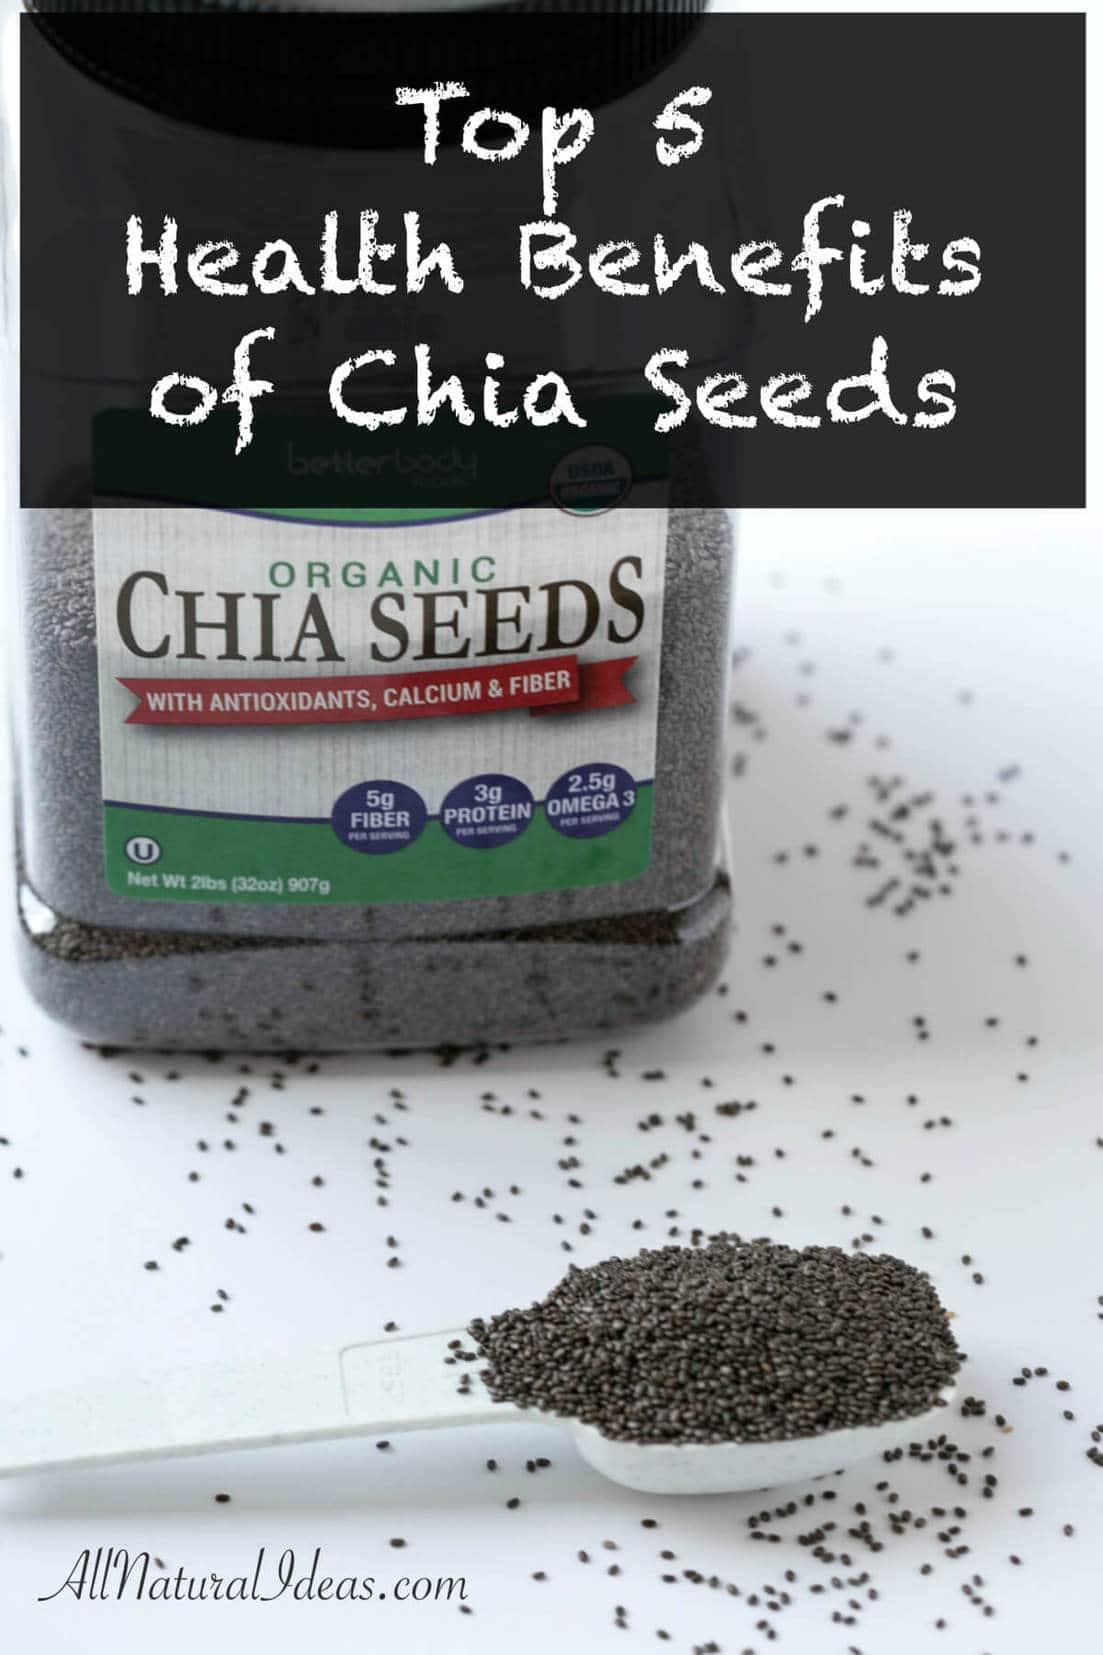 Top 5 Chia Seed Health Benefits and Recipes. Do you know what the chia seed health benefits are? These tiny seeds can provide quite a bit of nutrition into your diet.